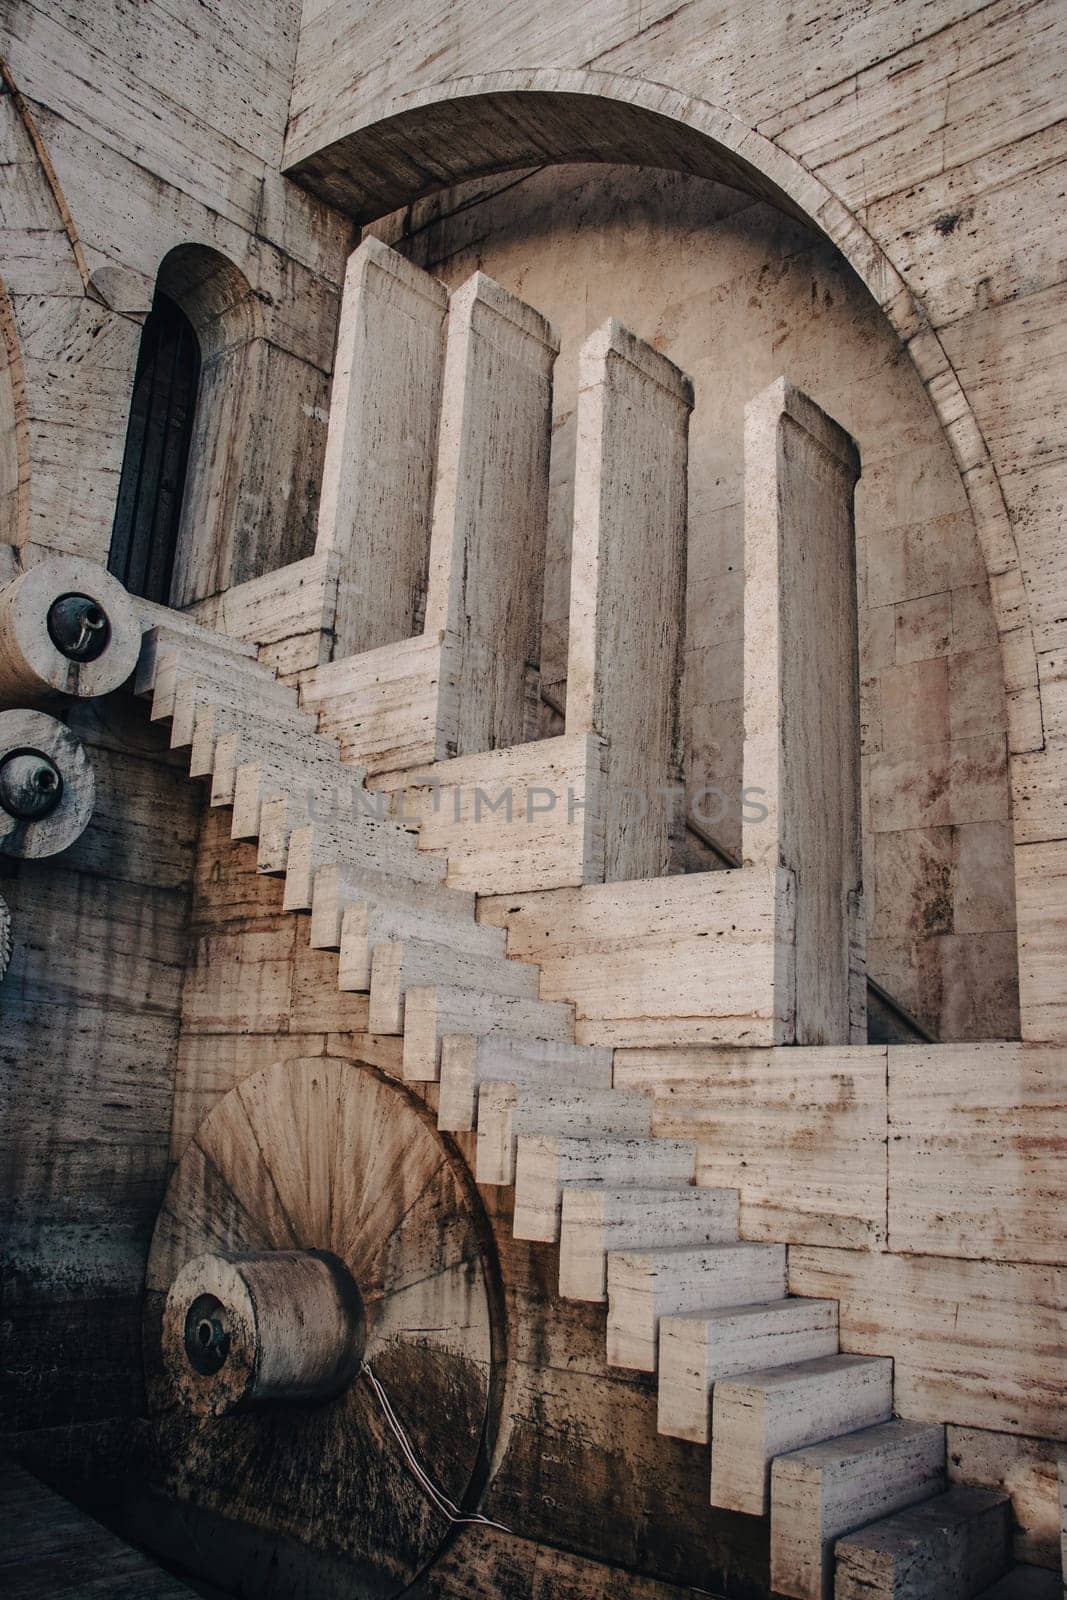 Carved steps staircase side view in modern architecture concept photo. by _Nataly_Nati_